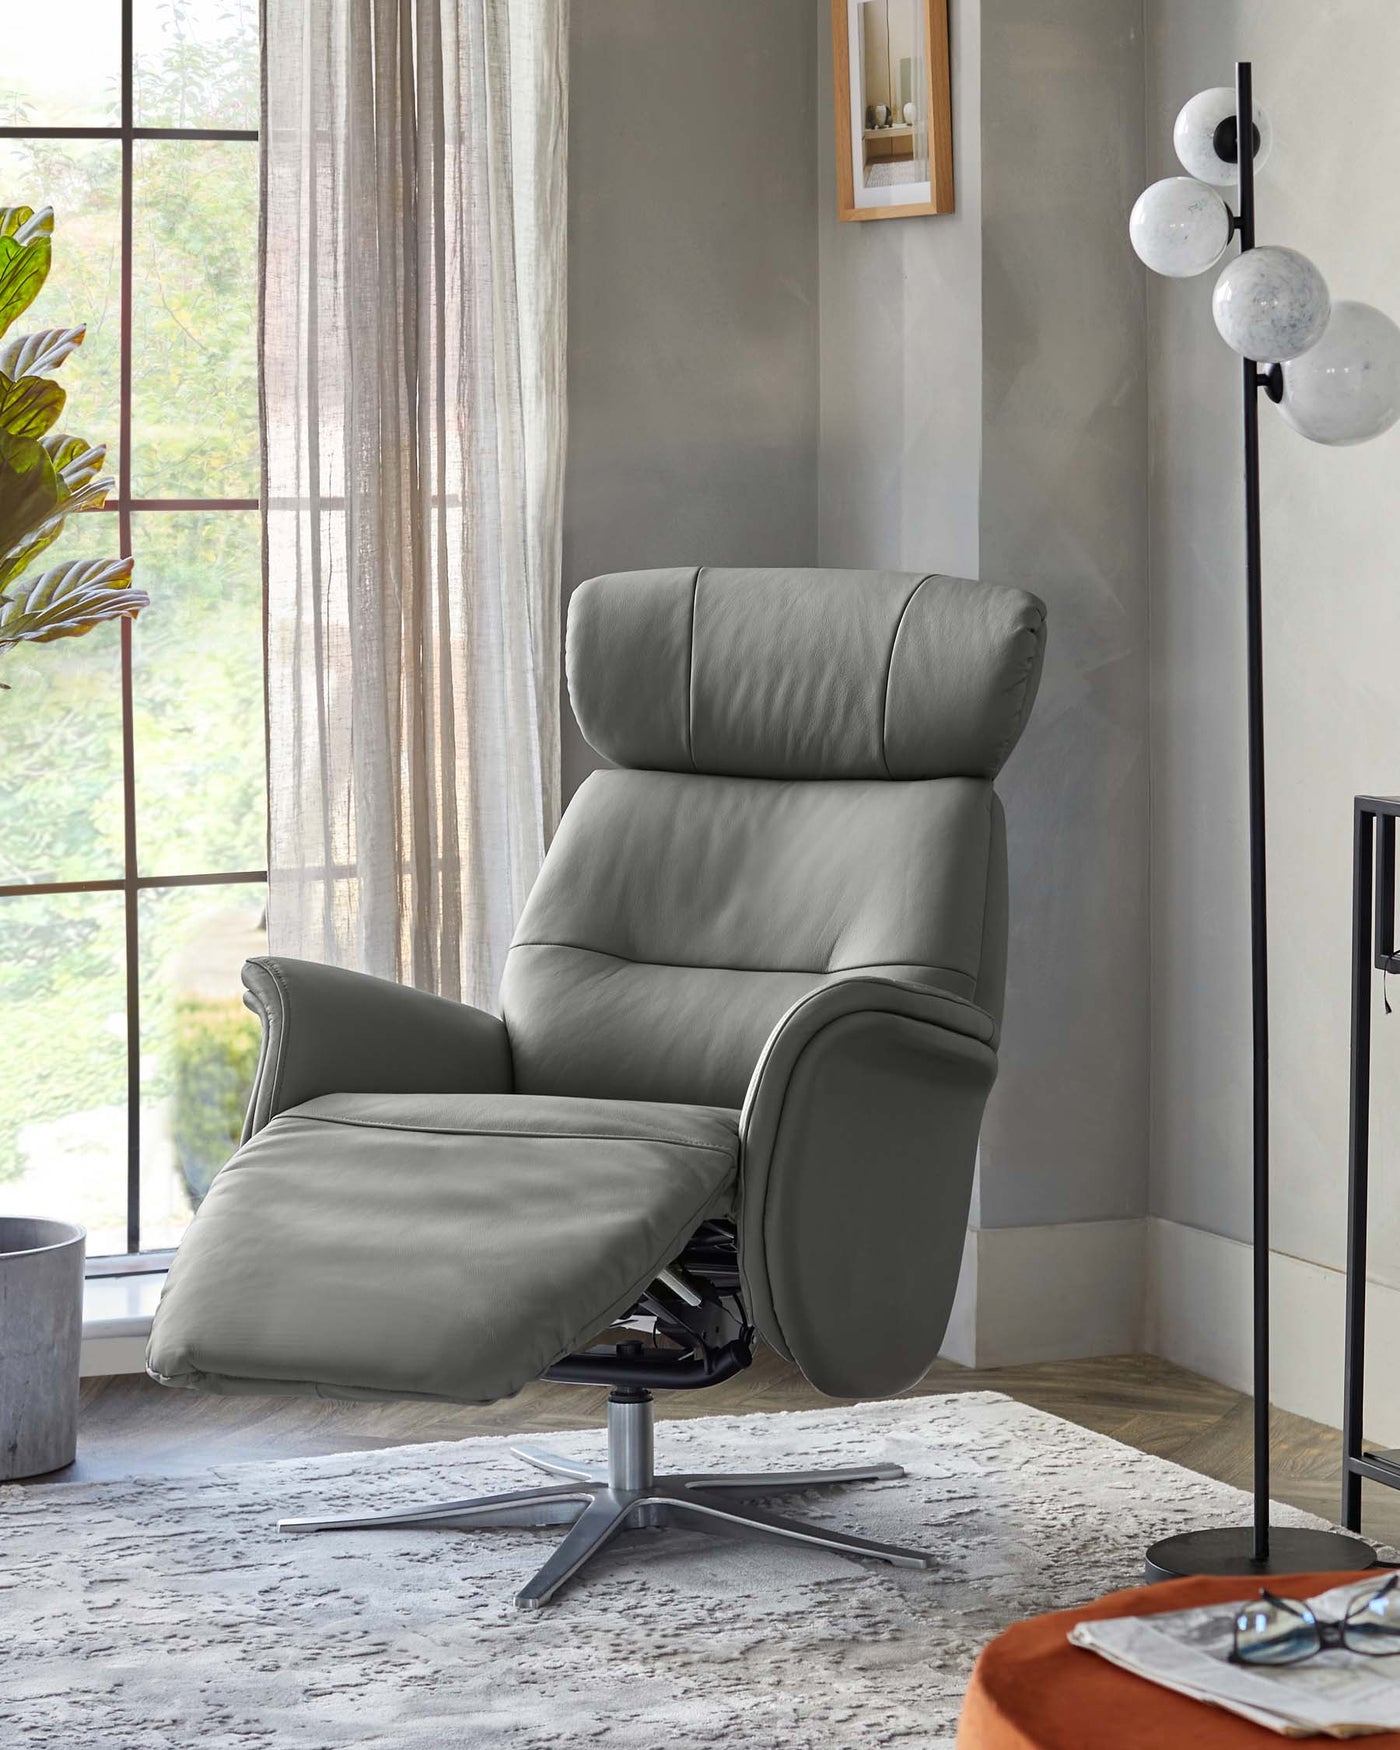 Modern grey leather recliner chair with padded headrest and armrests, featuring a swivel base and an adjustable head tilt, showcased in a bright room with natural light.